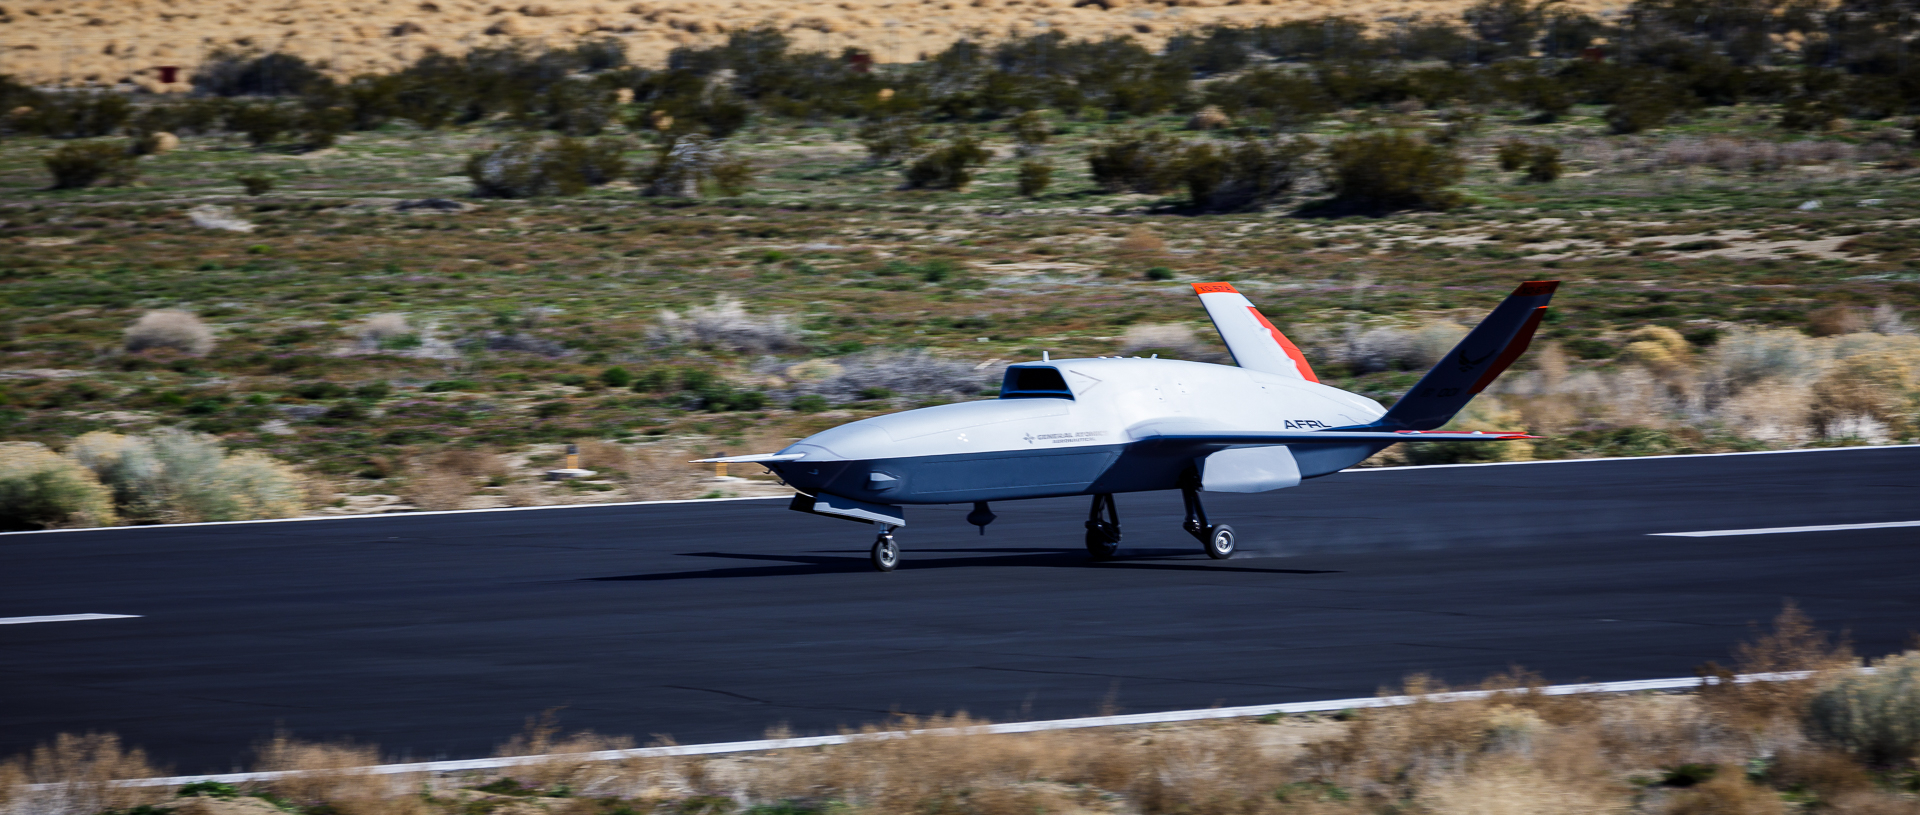 AFRL’s XQ-67A Off Board Sensing Station, or OBSS, designed and built by General Atomics, took its maiden flight Feb. 28 from Gray Butte Field Airport, Palmdale, California. XQ-67A completed several test points and safely recovered on the first of a series of flight tests. The XQ-67A is the first of a second generation of autonomous collaborative platforms, or ACP.(Courtesy photo.)